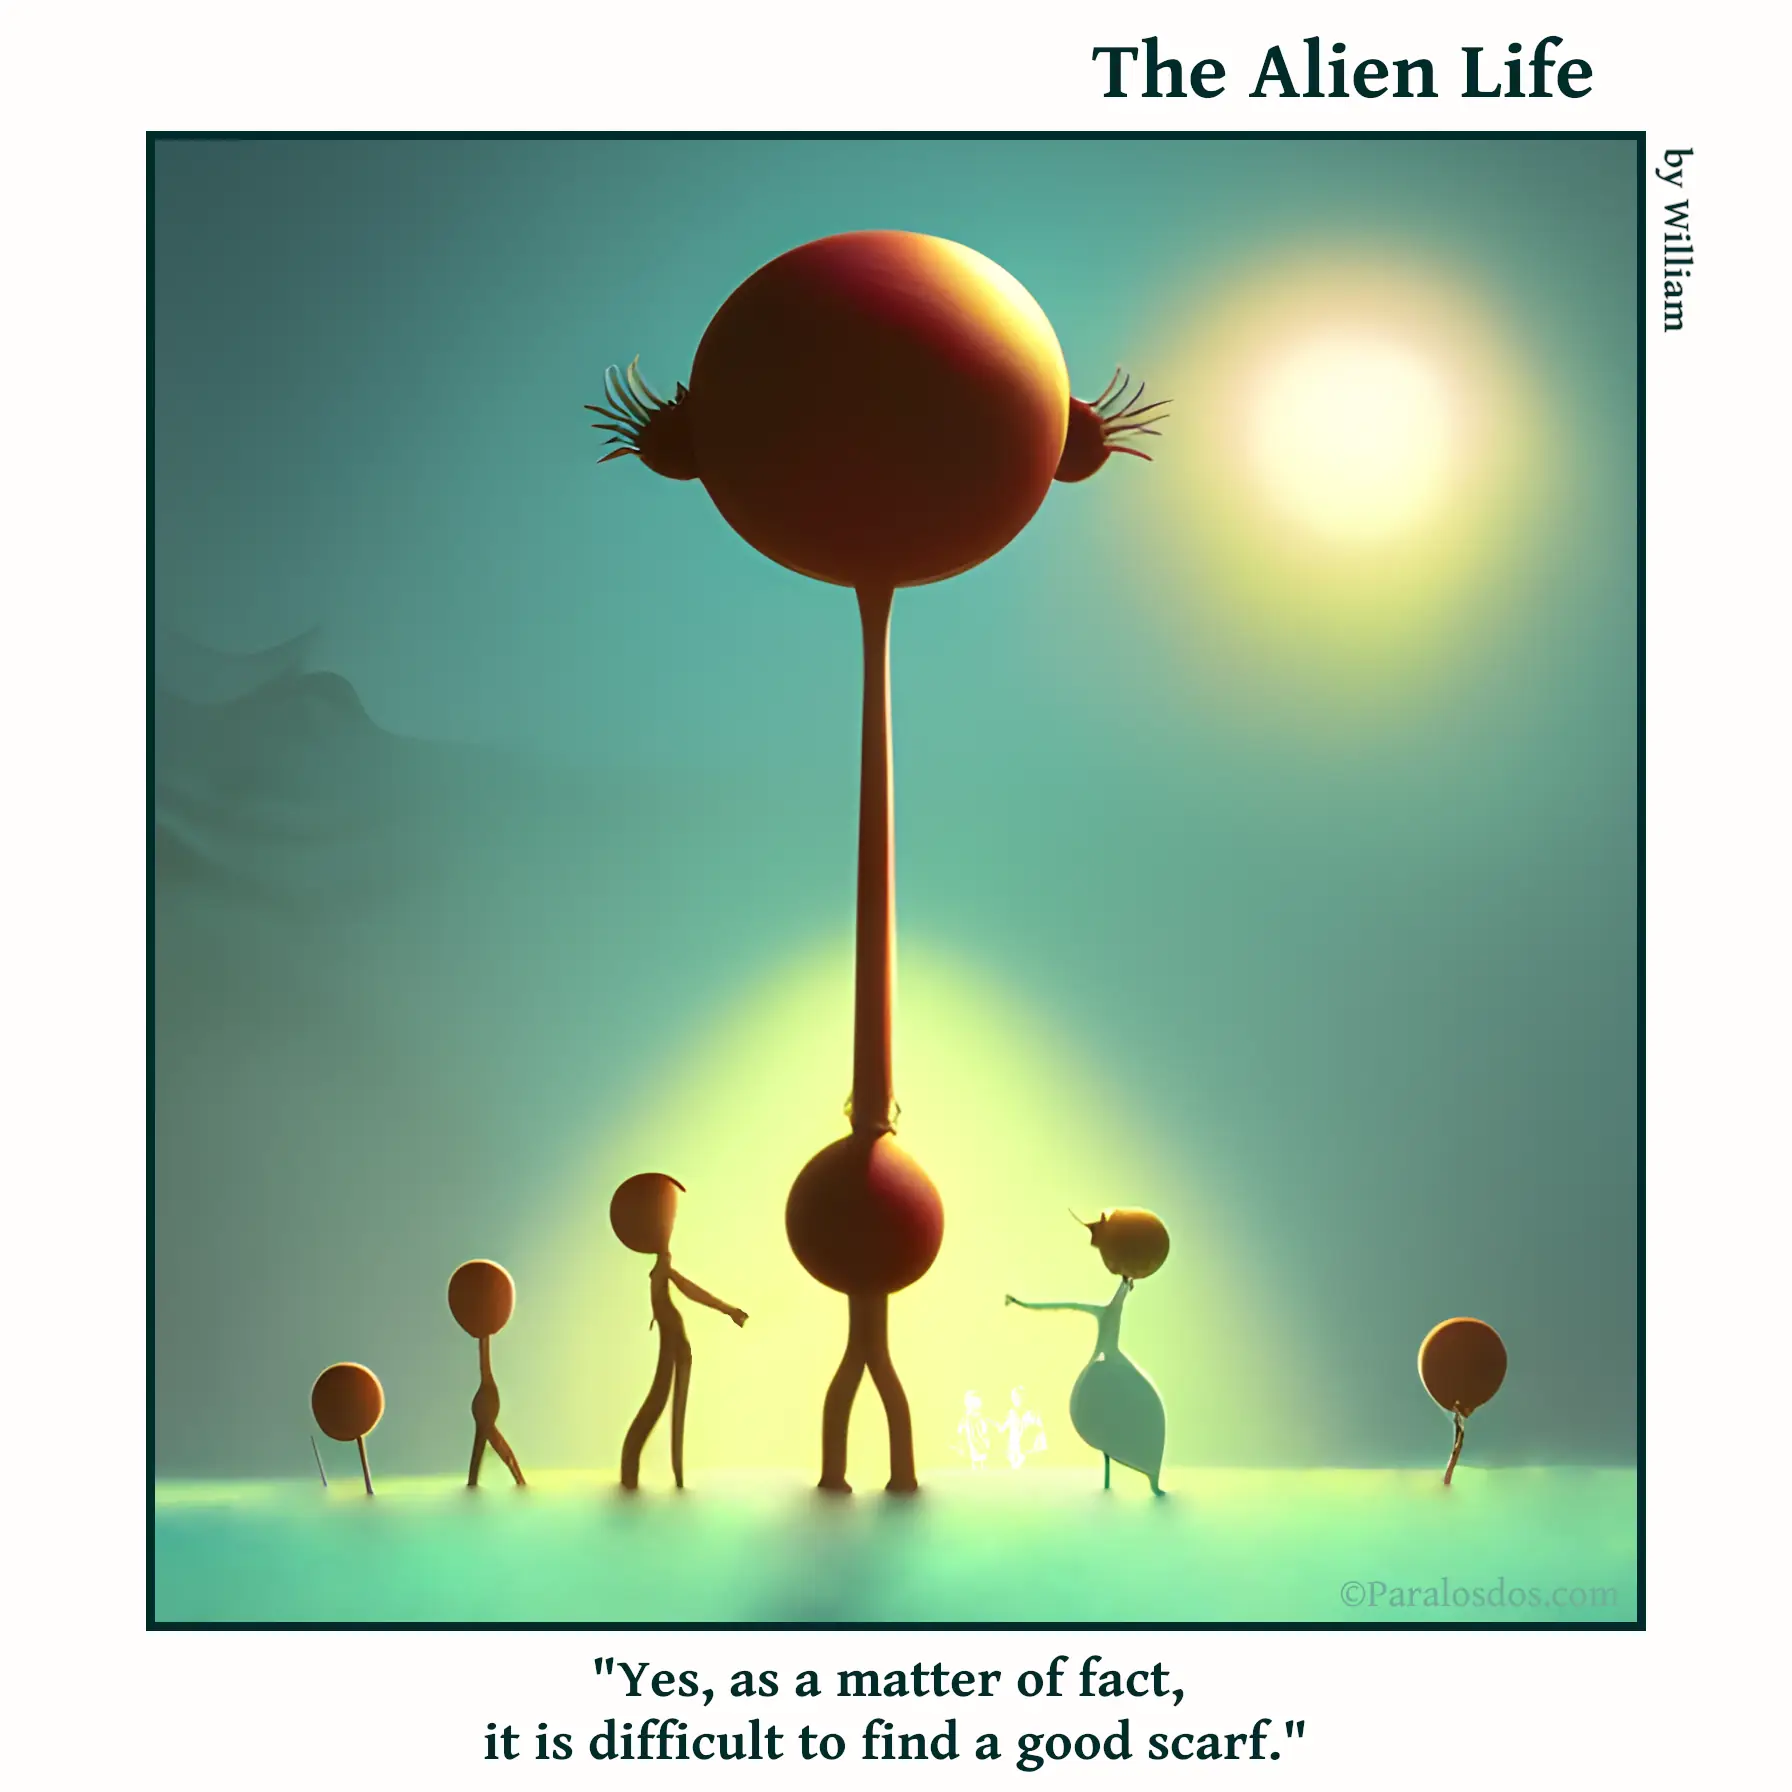 The Alien Life, one panel Comic. An alien with an incredibly long neck is standing with a group of aliens. The caption reads: "Yes, as a matter of fact, it is difficult to find a good scarf."